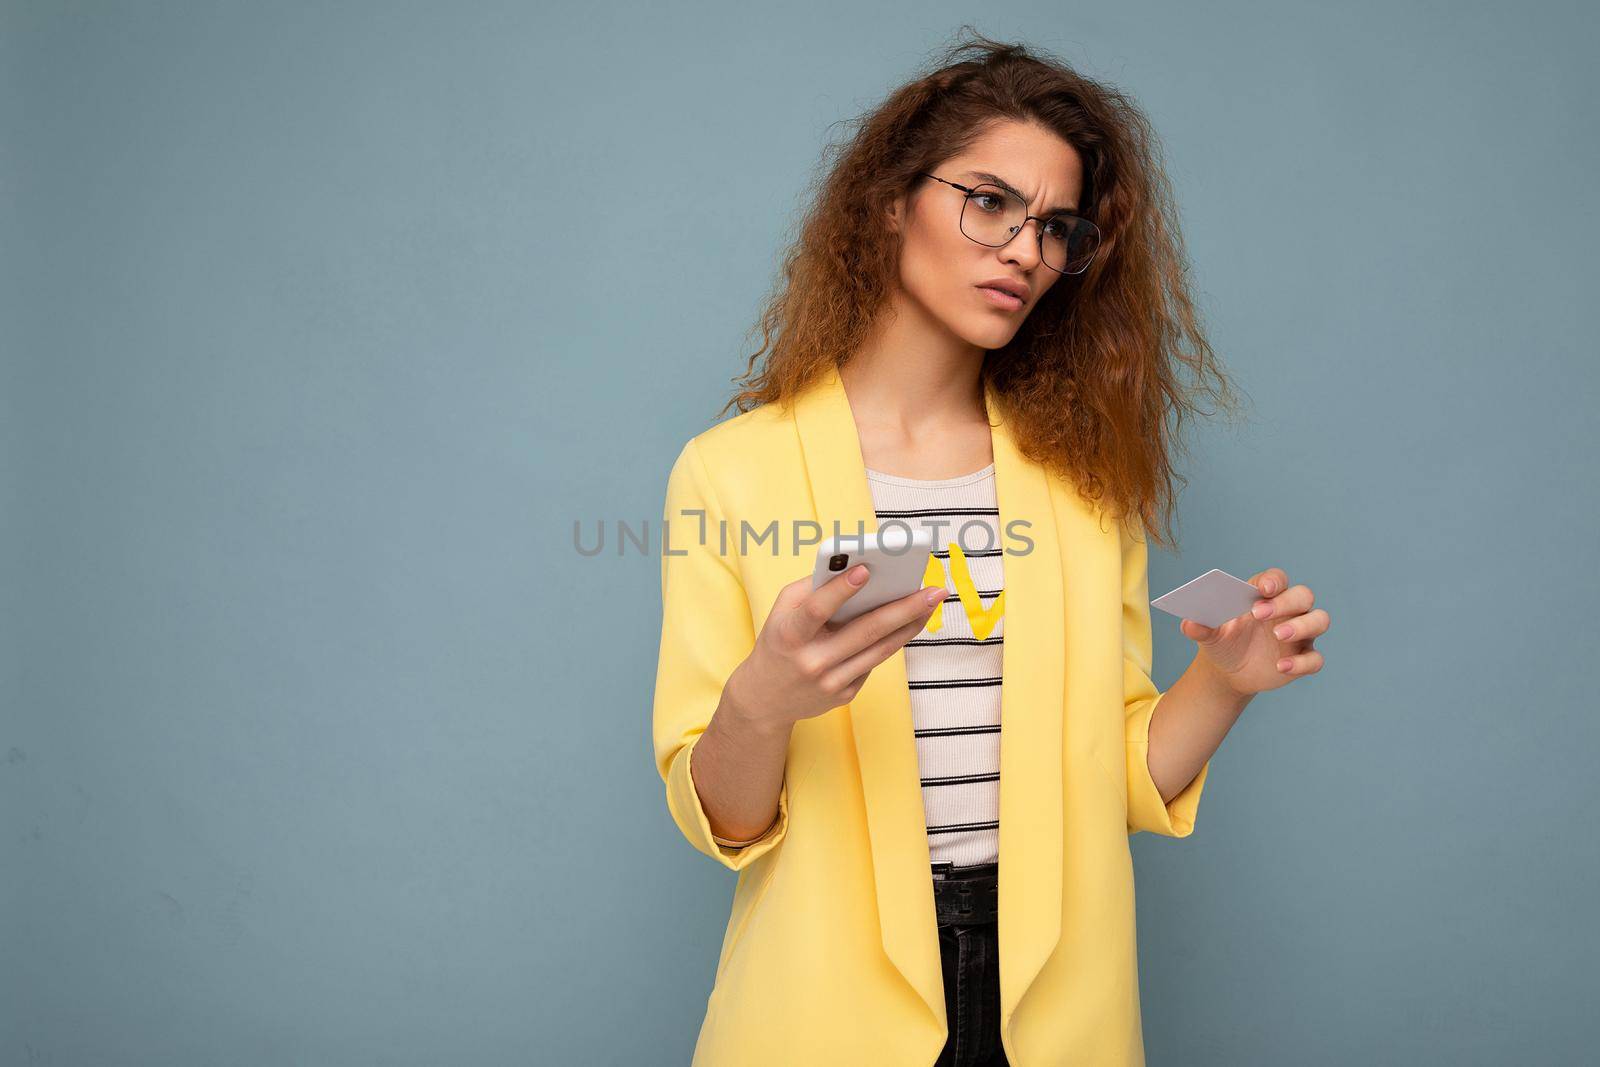 Pretty upset sad woman wearing everyday stylish clothes isolated on background wall holding and using phone and credit card making payment looking to the side.